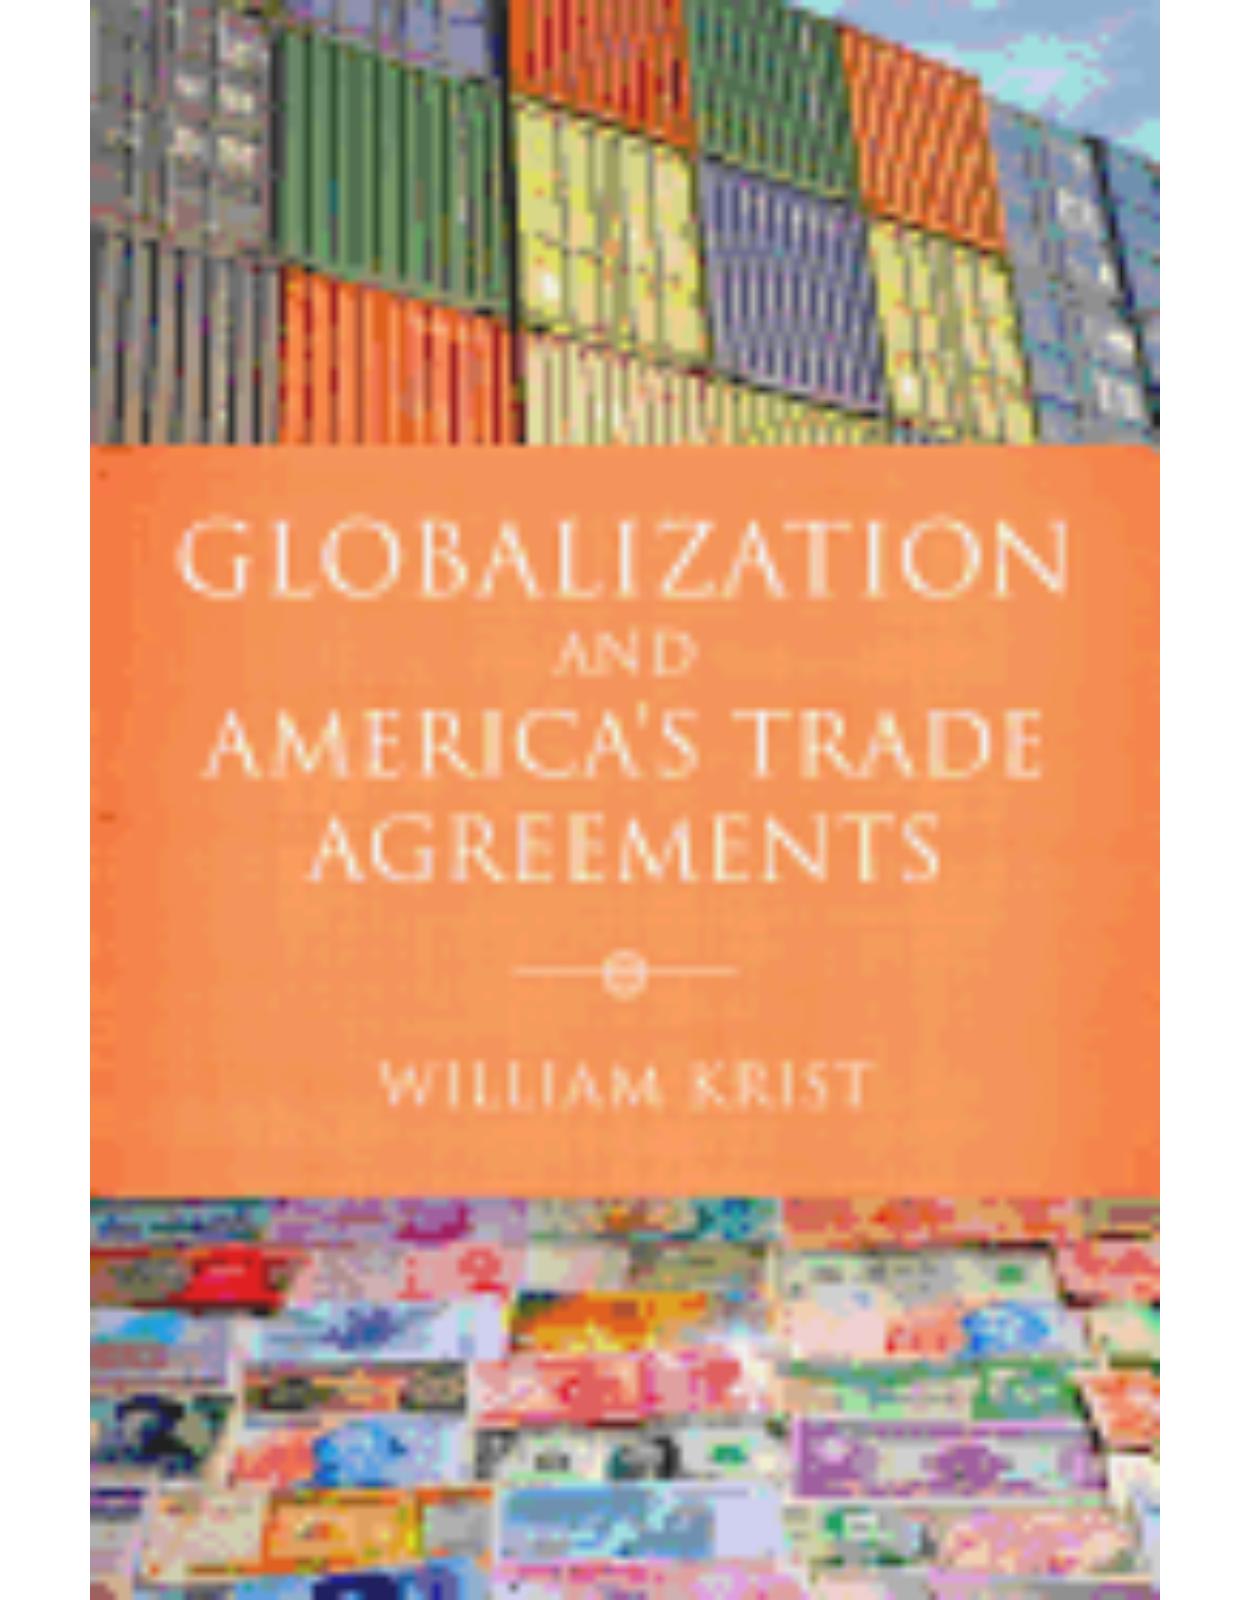 Globalization and AmericaÂ’s Trade Agreements.